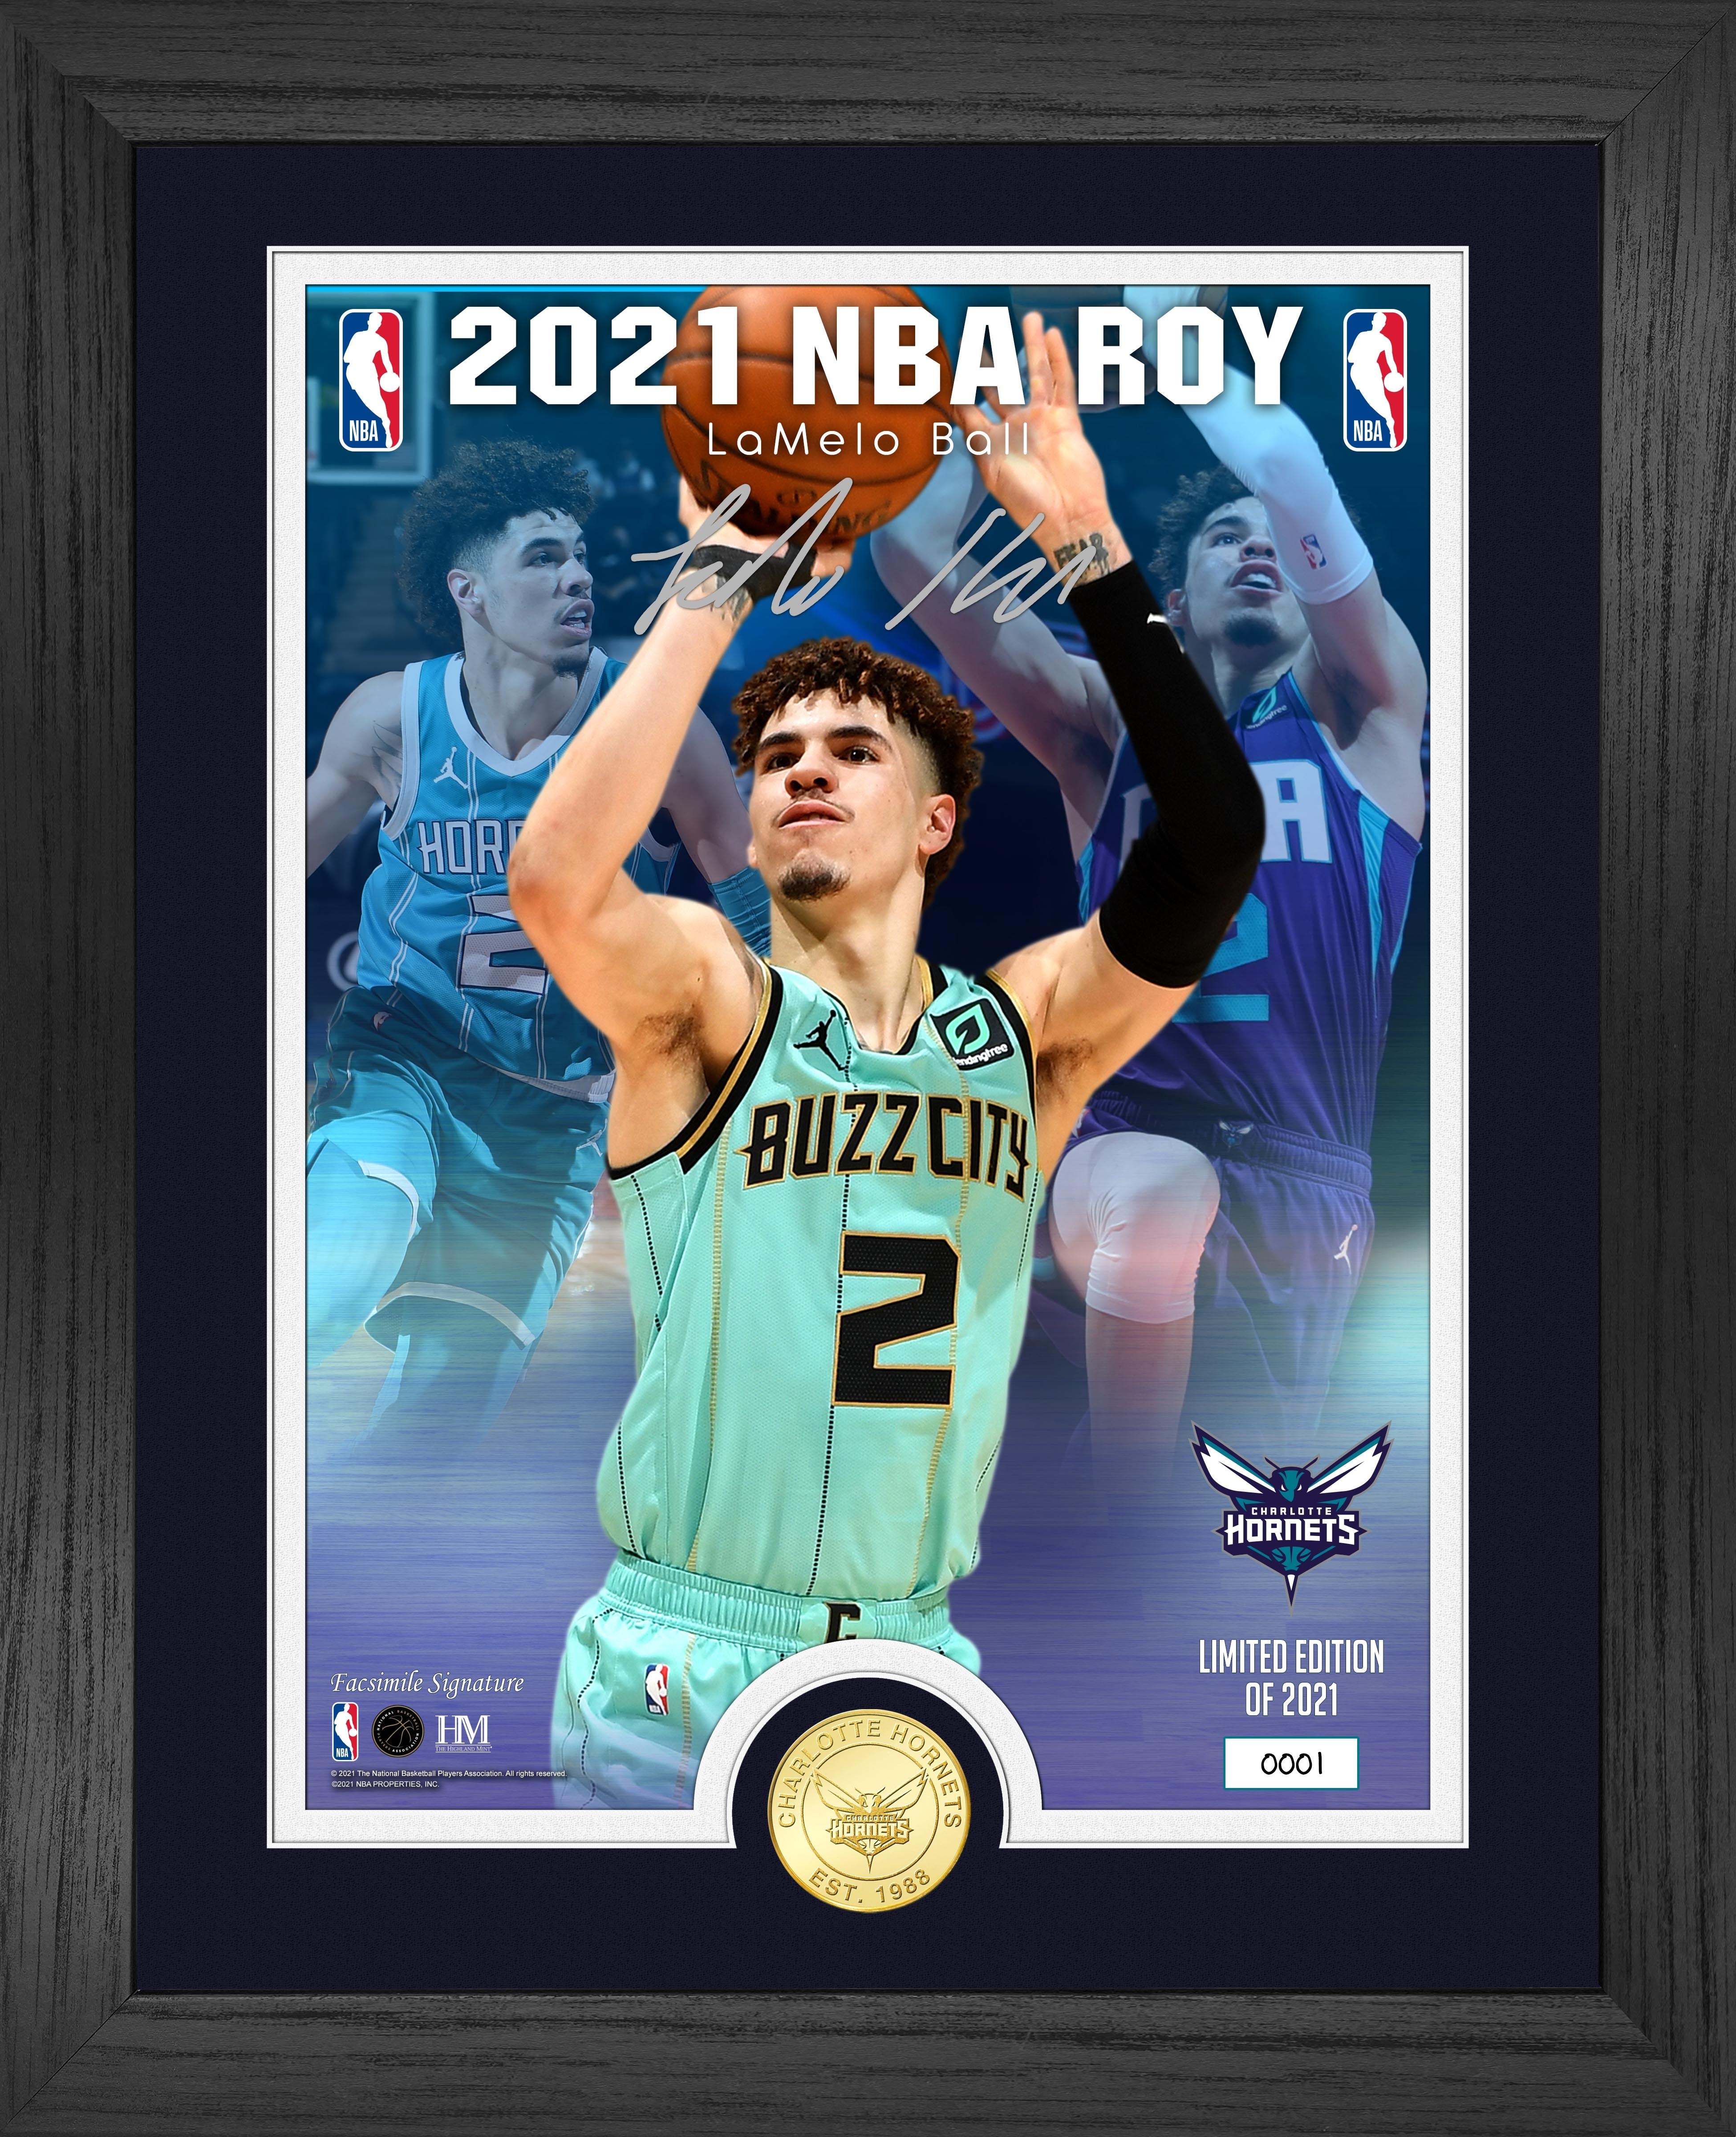 LaMelo Ball Charlotte Hornets 2021 NBA Rookie of the Year Bronze Coin Photo Mint